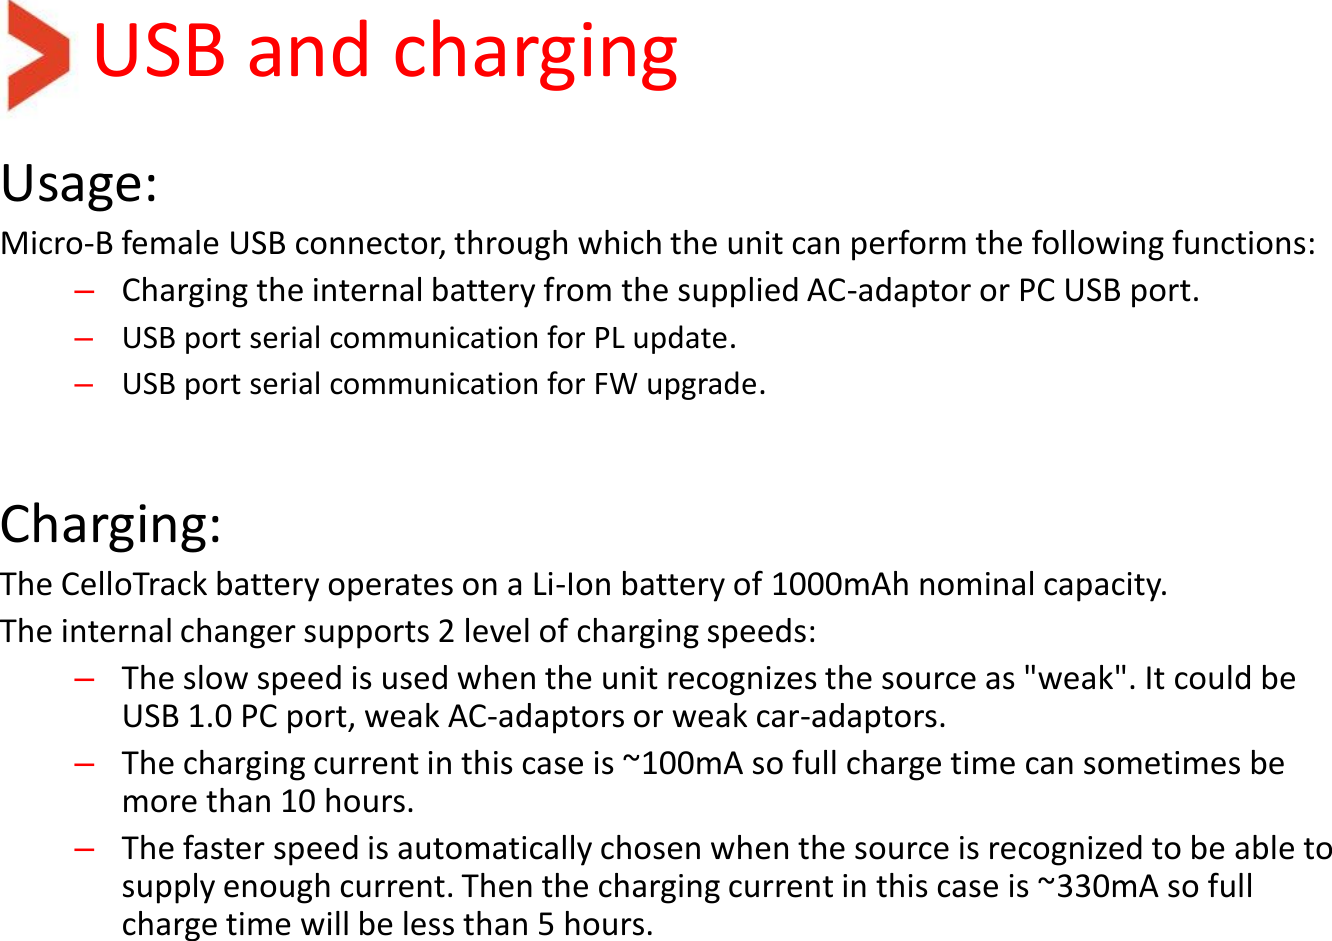 USB and charging Usage: Micro-B female USB connector, through which the unit can perform the following functions: –Charging the internal battery from the supplied AC-adaptor or PC USB port. –USB port serial communication for PL update. –USB port serial communication for FW upgrade.   Charging: The CelloTrack battery operates on a Li-Ion battery of 1000mAh nominal capacity. The internal changer supports 2 level of charging speeds: –The slow speed is used when the unit recognizes the source as &quot;weak&quot;. It could be USB 1.0 PC port, weak AC-adaptors or weak car-adaptors. –The charging current in this case is ~100mA so full charge time can sometimes be more than 10 hours.  –The faster speed is automatically chosen when the source is recognized to be able to supply enough current. Then the charging current in this case is ~330mA so full charge time will be less than 5 hours. 